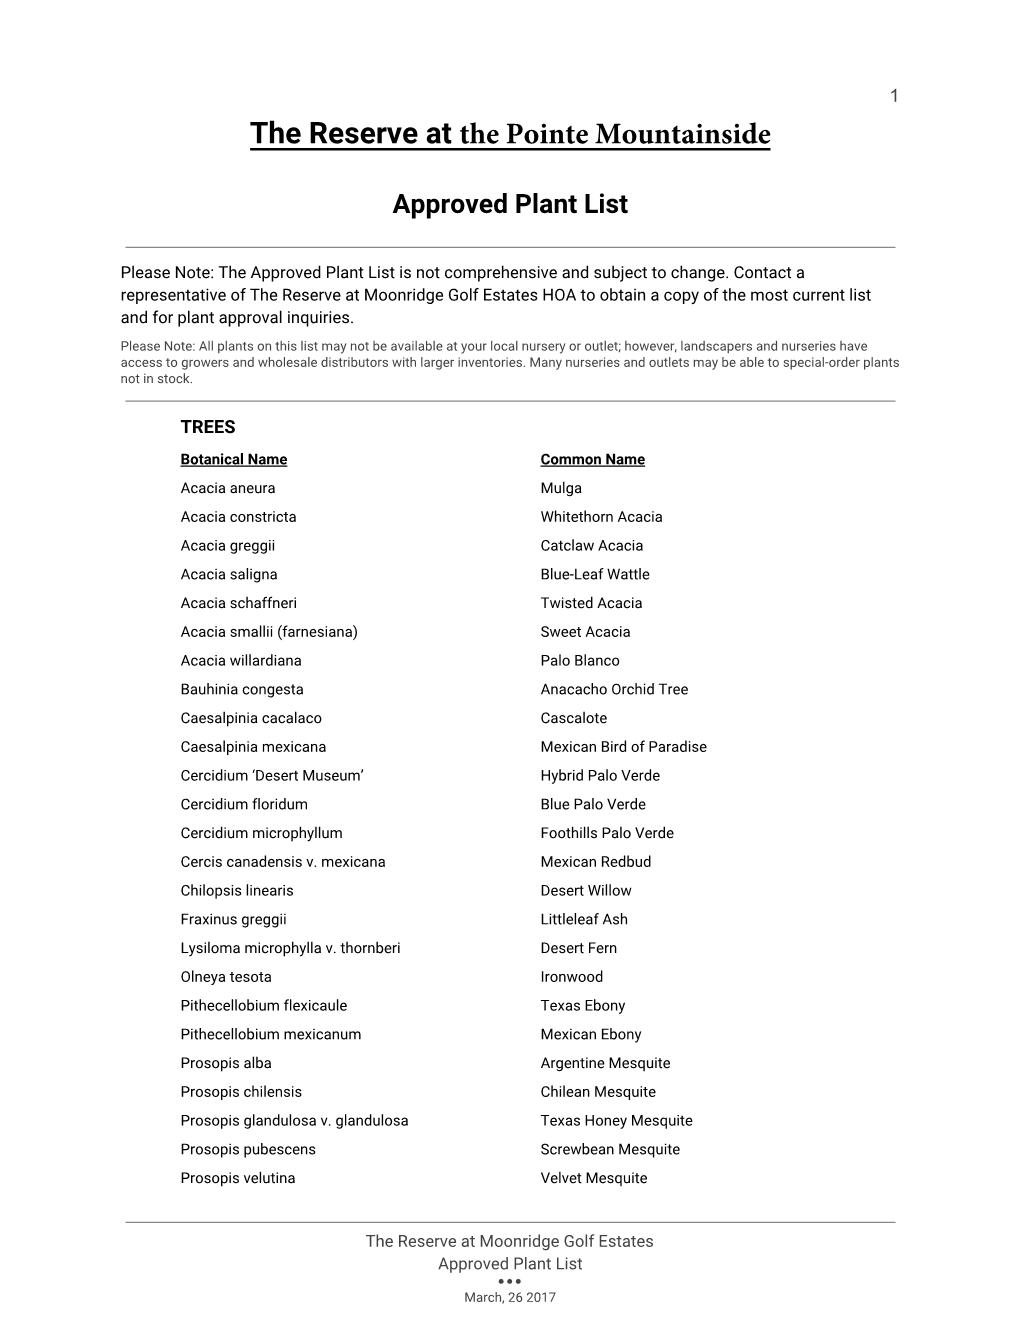 The Reserve at the Pointe Mountainside Approved Plant List